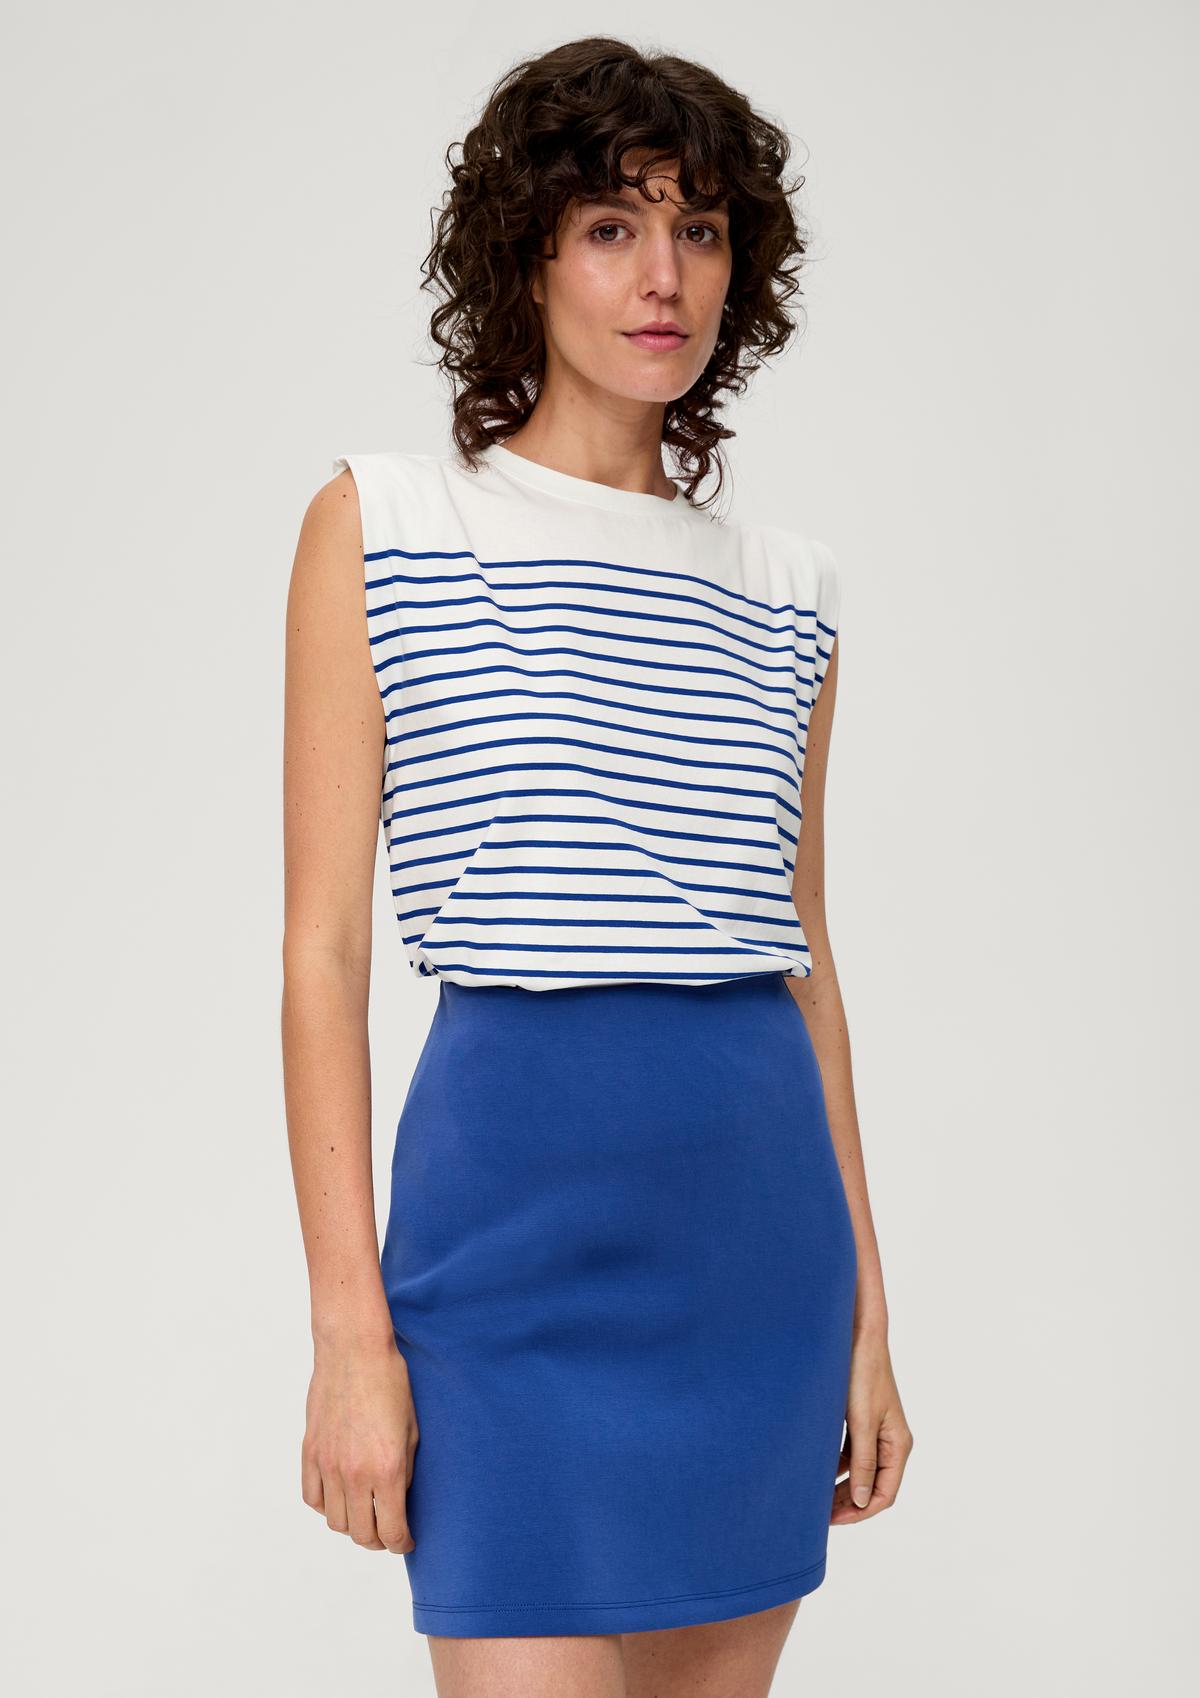 Striped top with shoulder pads